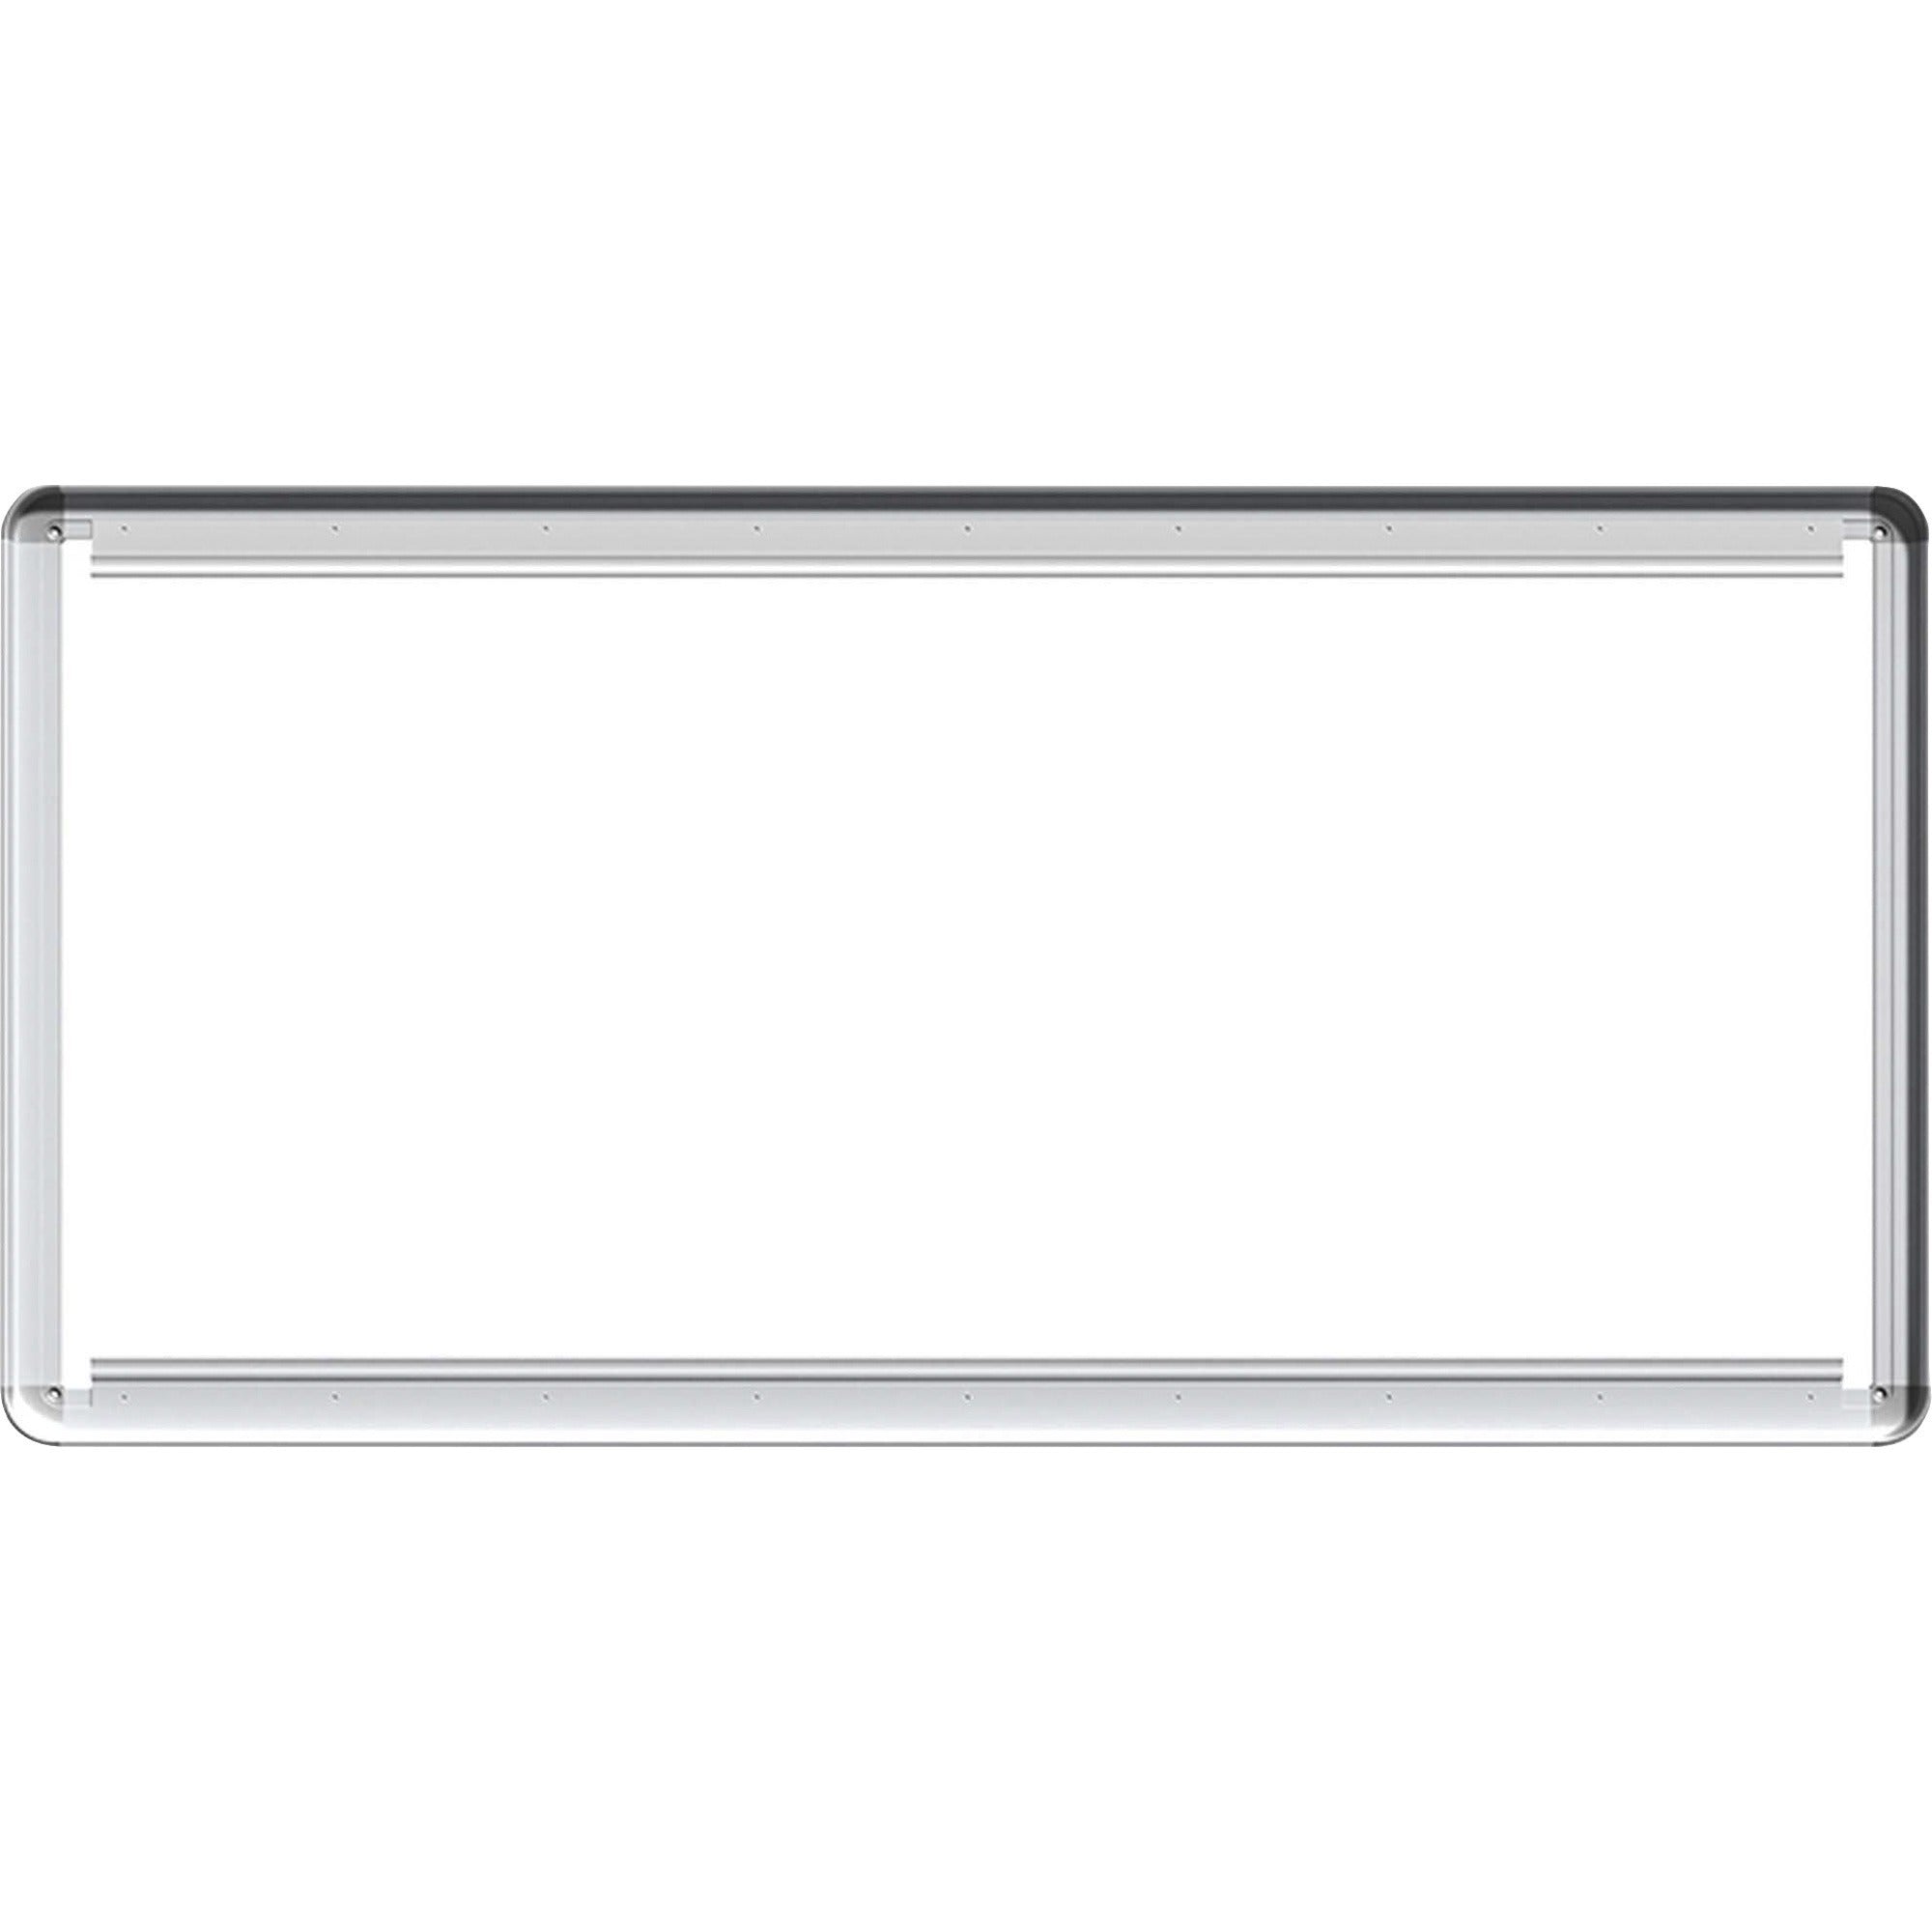 lorell-mounting-frame-for-whiteboard-silver-1-each_llr18322 - 1